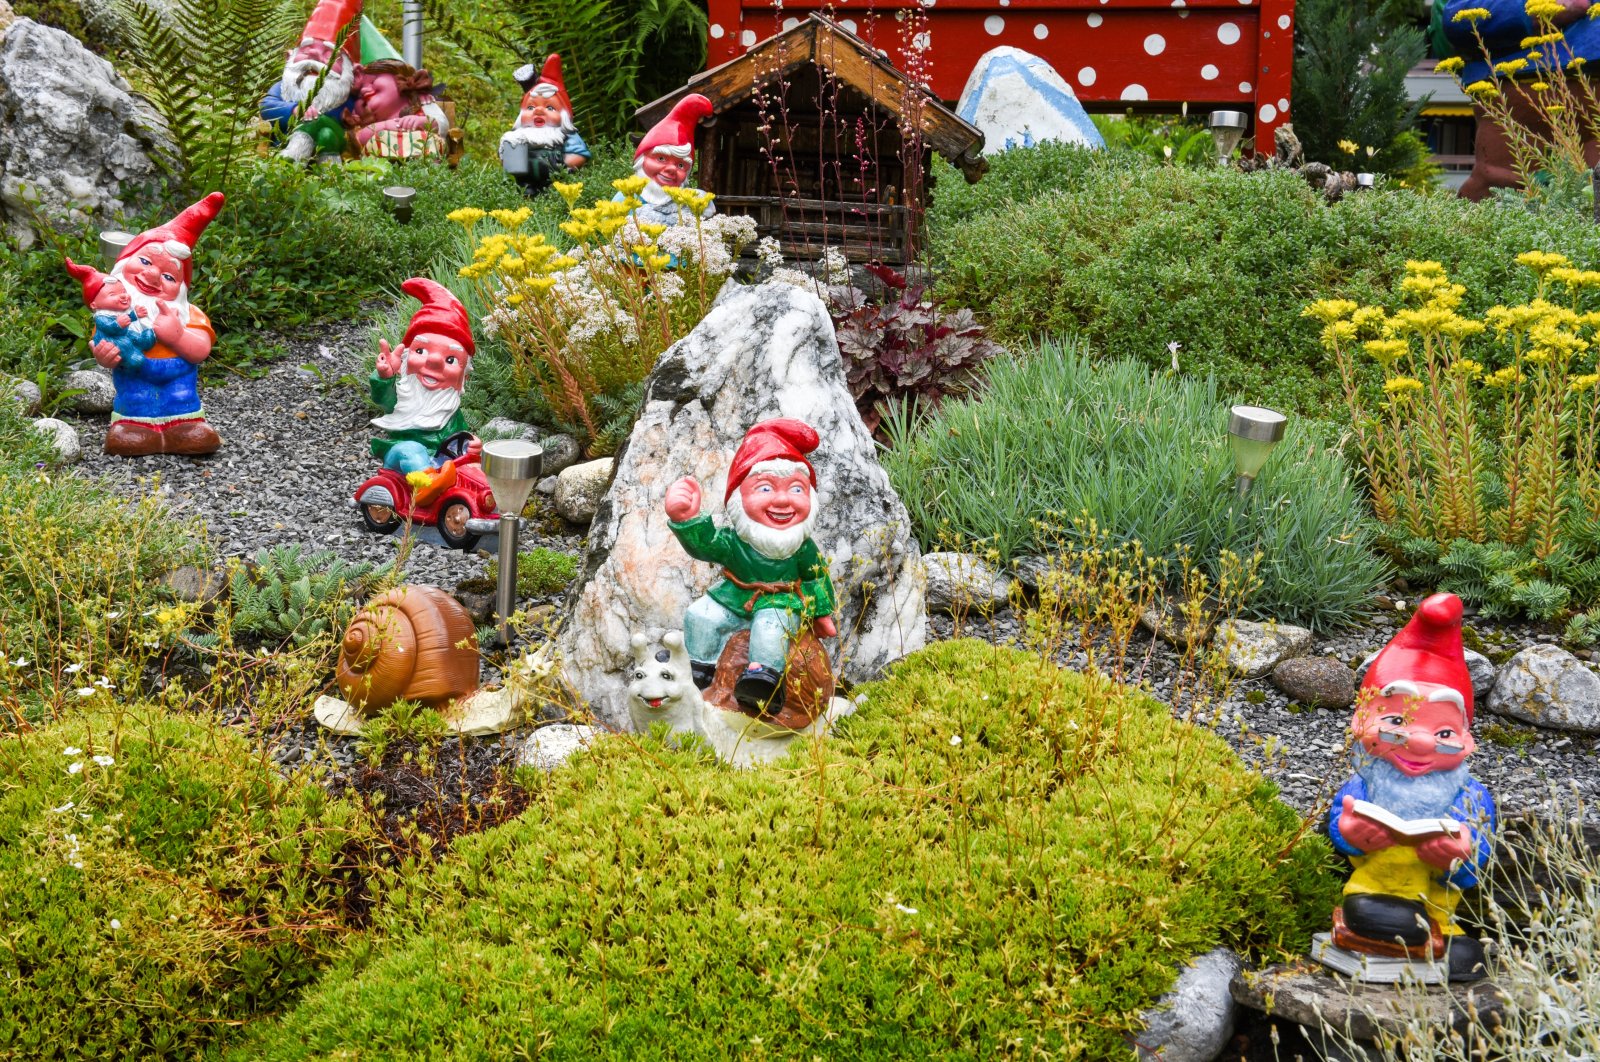 Real garden gnomes wear a pointed cap and engage in a nature-oriented or friendly activity. (Shutterstock) 